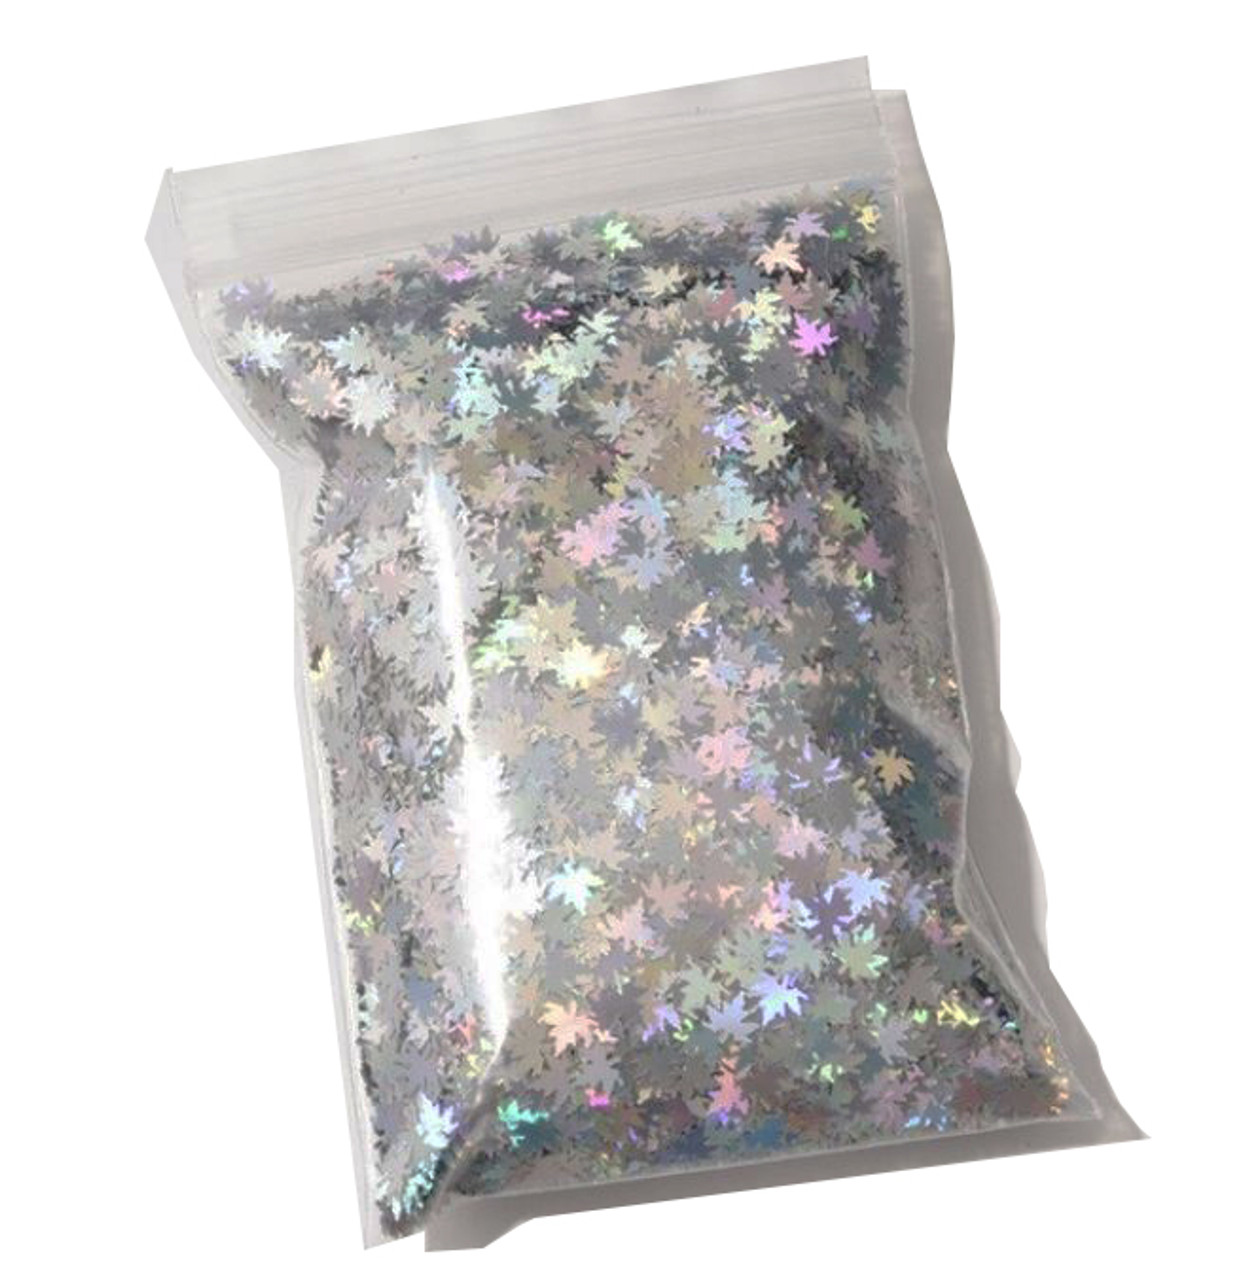 NDi beauty Nail Art Holographic Glitter Flakes Sparkly Silver Maple Leafs - 10g